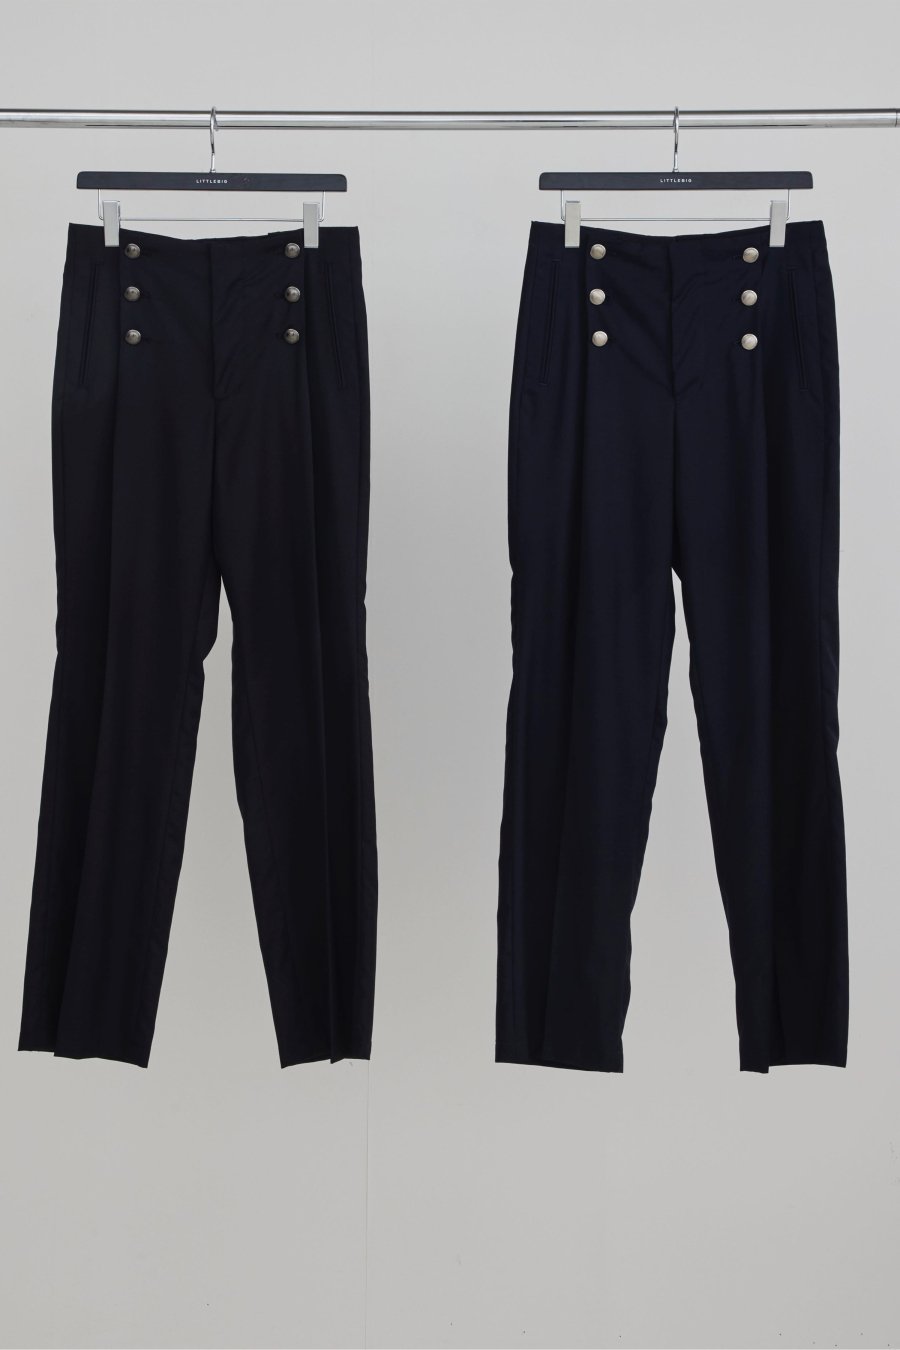 LITTLEBIG  Sailor Trousers(Navy)<img class='new_mark_img2' src='https://img.shop-pro.jp/img/new/icons15.gif' style='border:none;display:inline;margin:0px;padding:0px;width:auto;' />